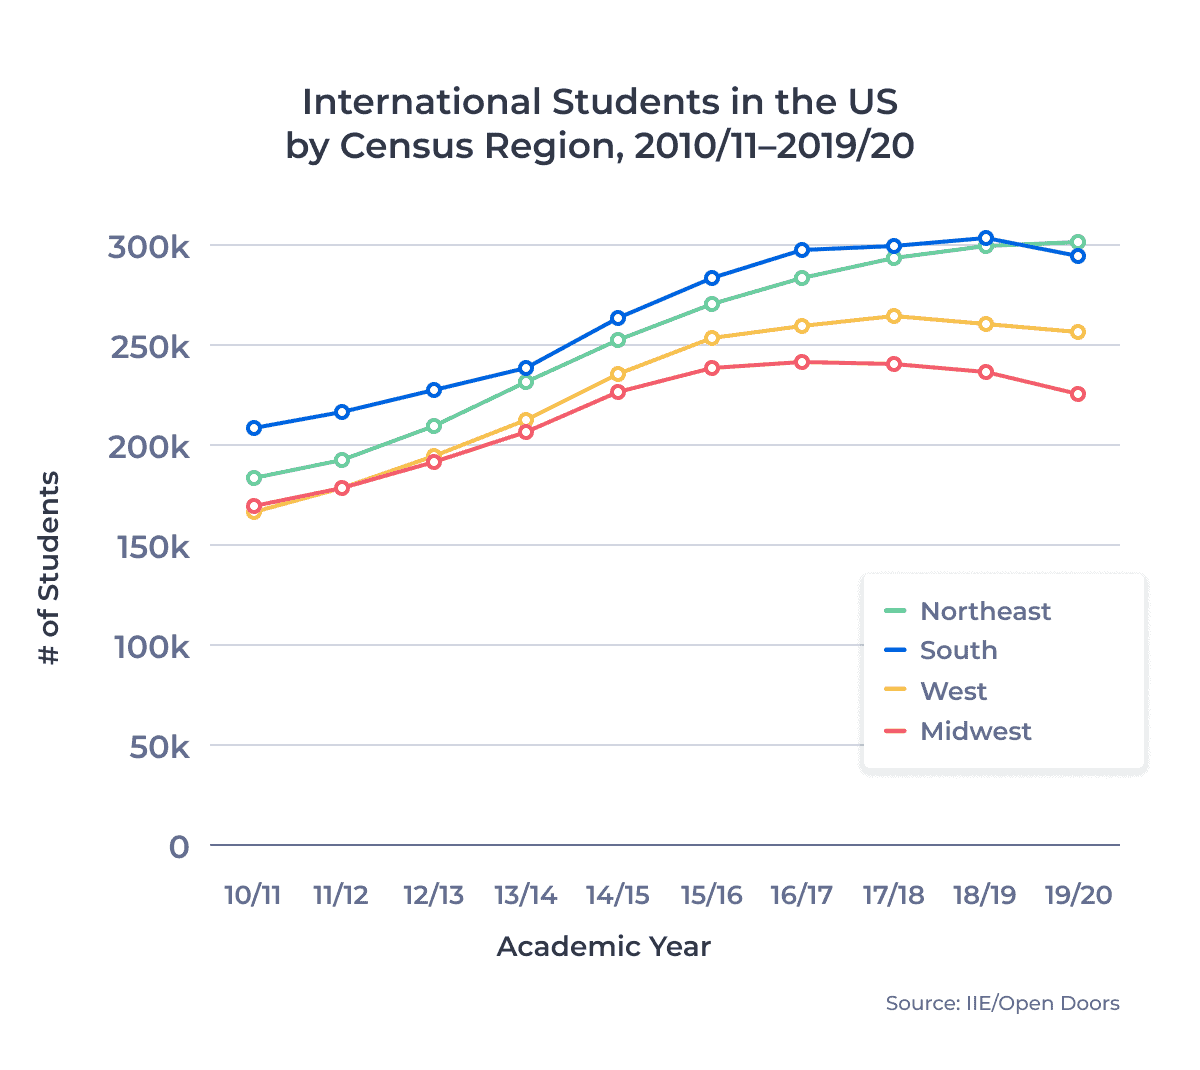 Line chart showing the distribution of international students in the US by census region from academic year 2010/11 to 2019/20. Examined in detail below.